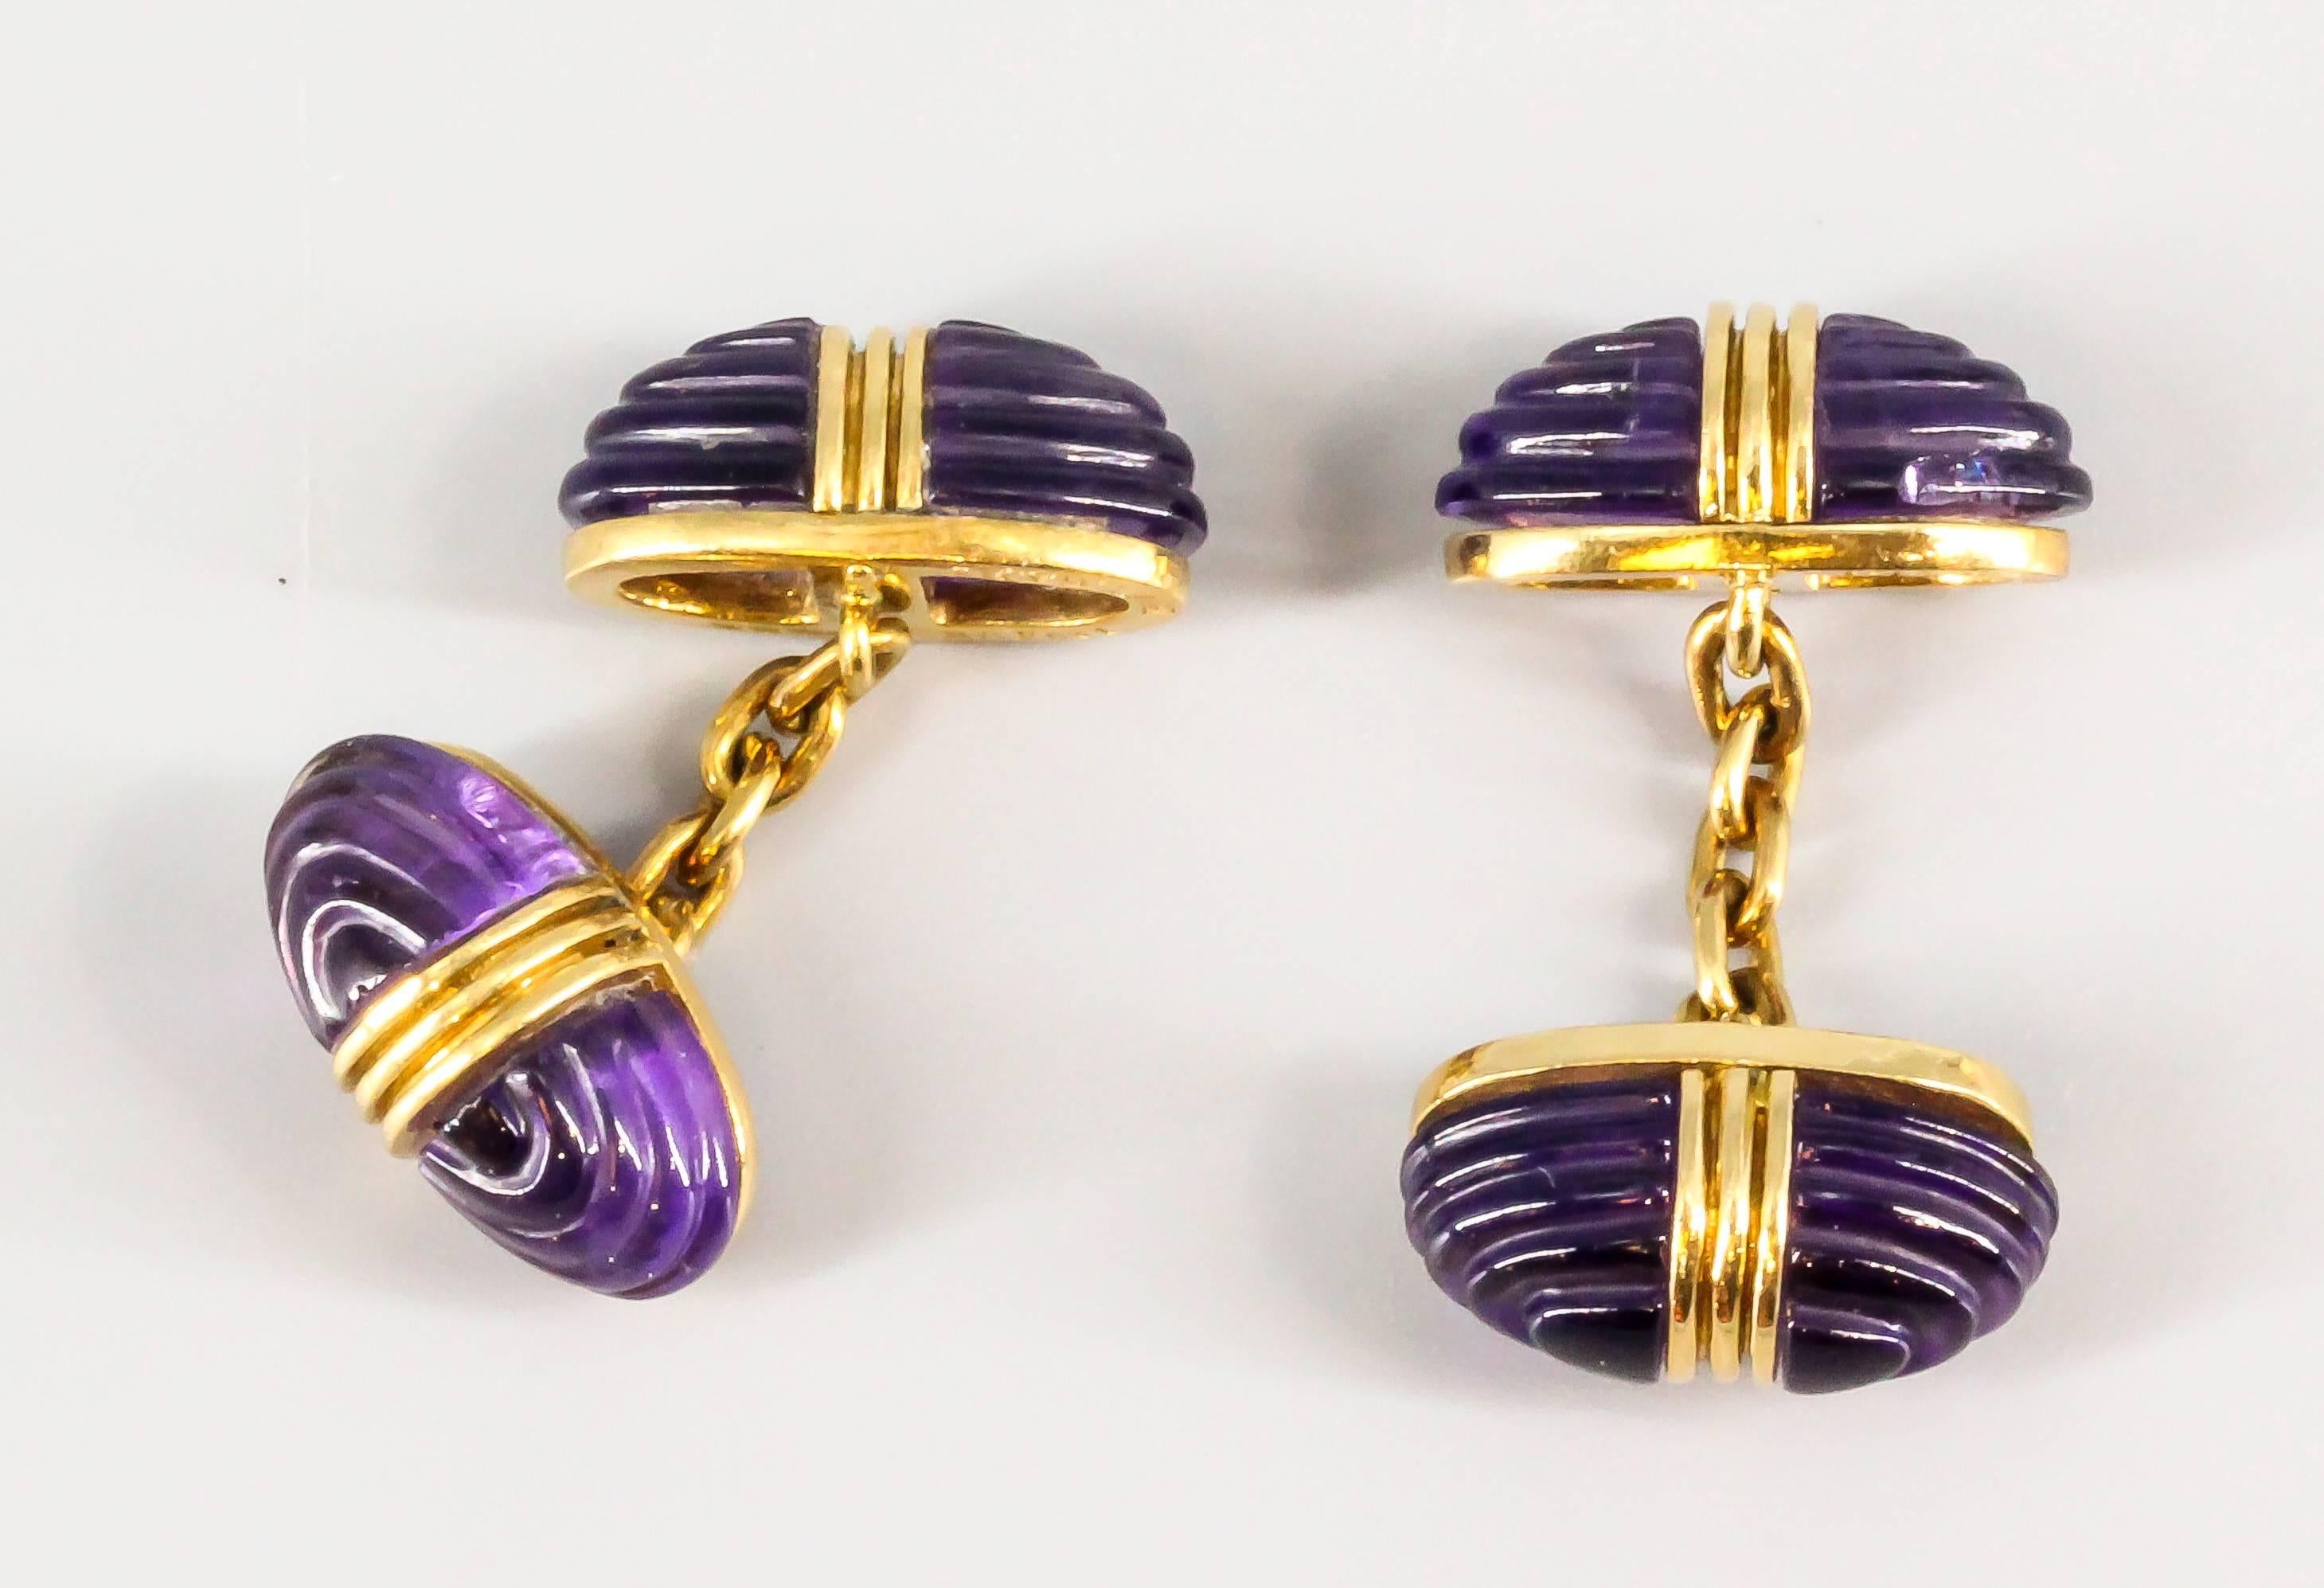 Rare and unusual carved amethyst and 18K yellow gold cufflinks and studs set by Bulgari, circa 1960s. Beautifully made with excellent workmanship. Set comes with three studs.

Hallmarks: Bulgari, 750, Italian standard marks, reference numbers.